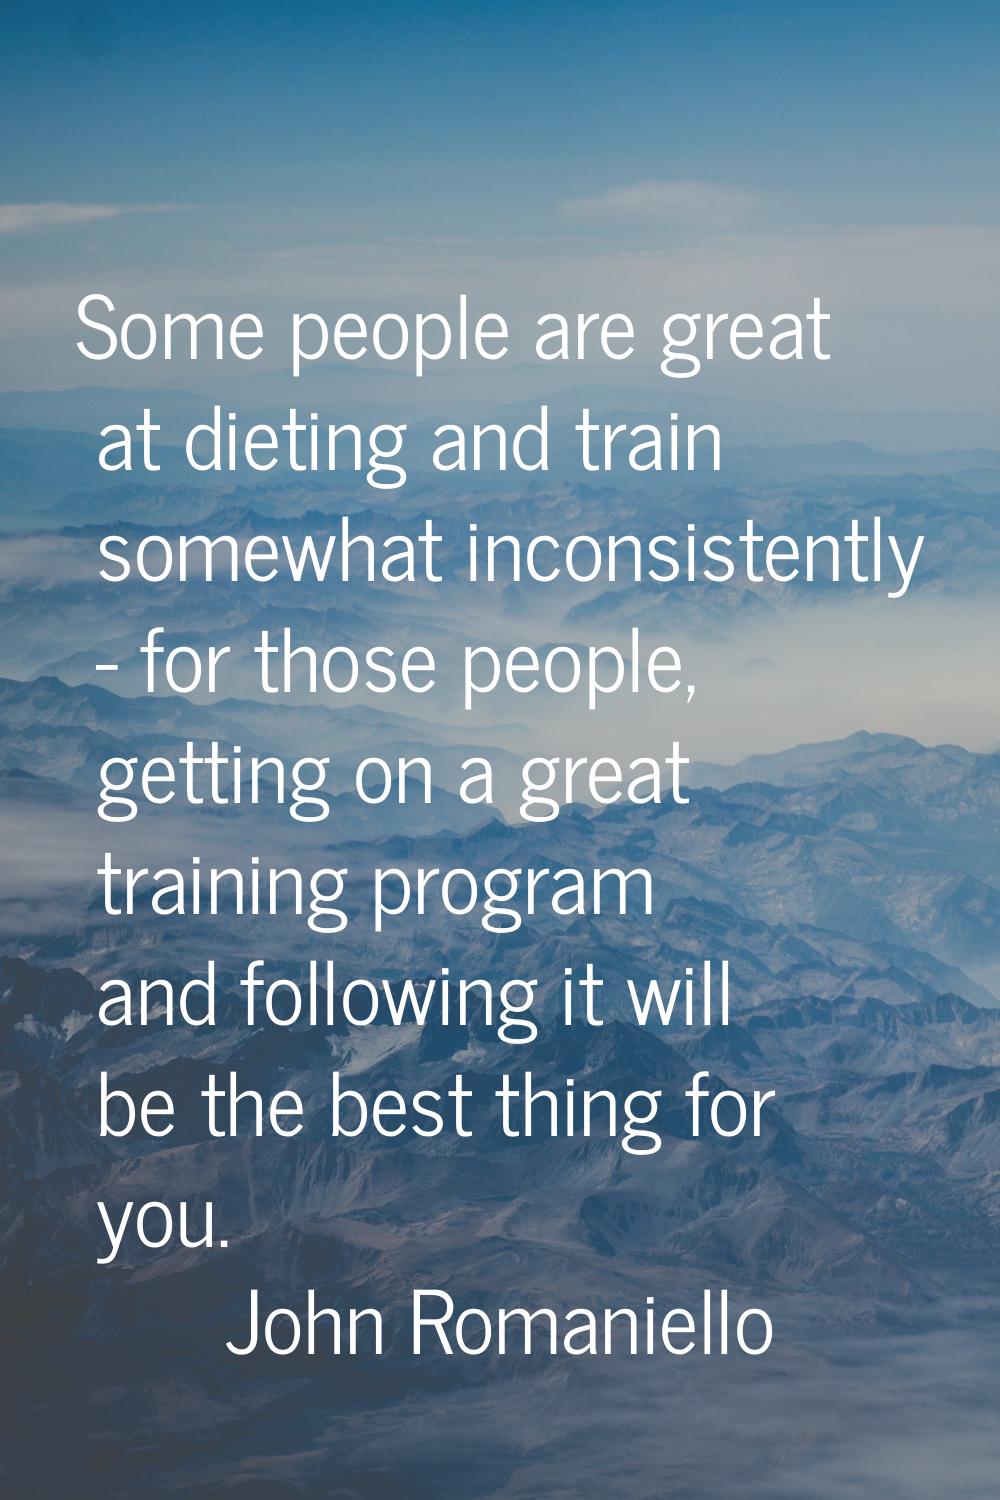 Some people are great at dieting and train somewhat inconsistently - for those people, getting on a